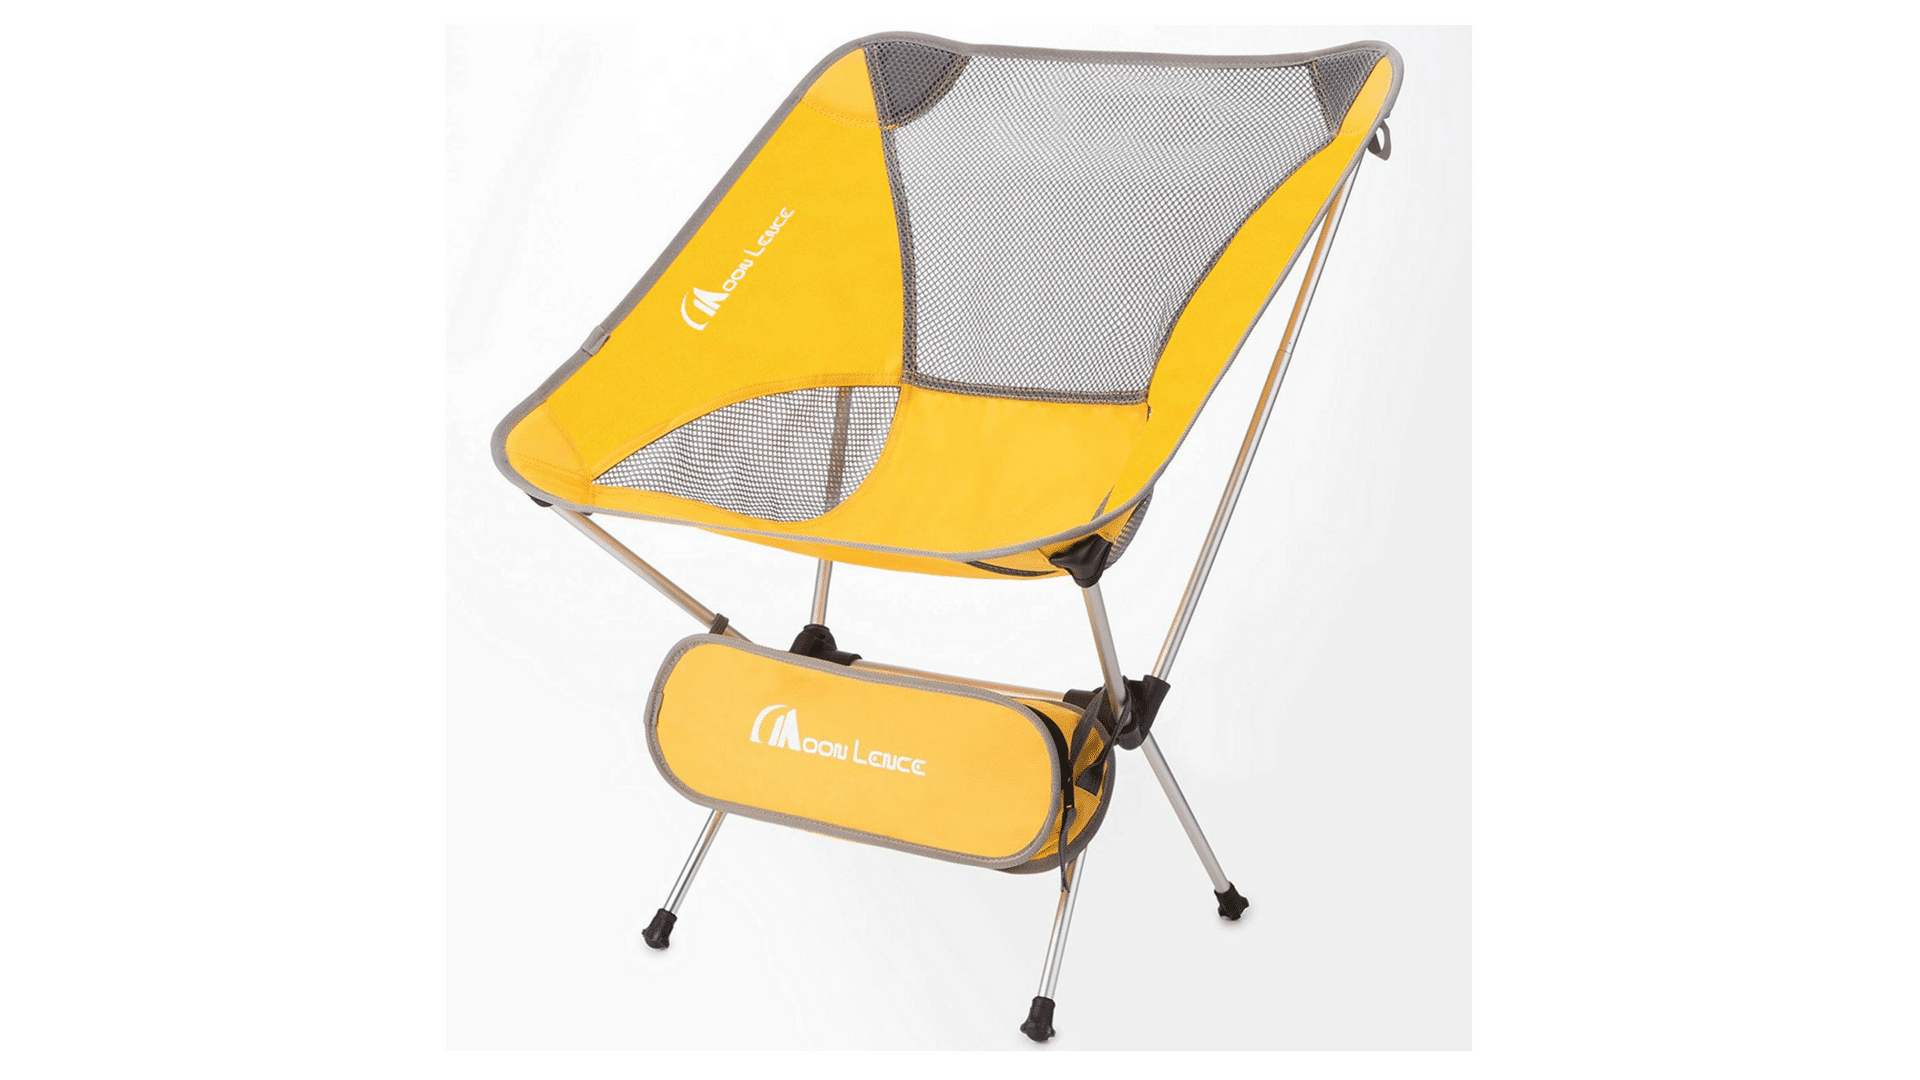 moon lence chair, moon lence camping chair, moon lence ultralight portable folding camping chairs, moon lence ultralight portable folding camping backpacking chairs